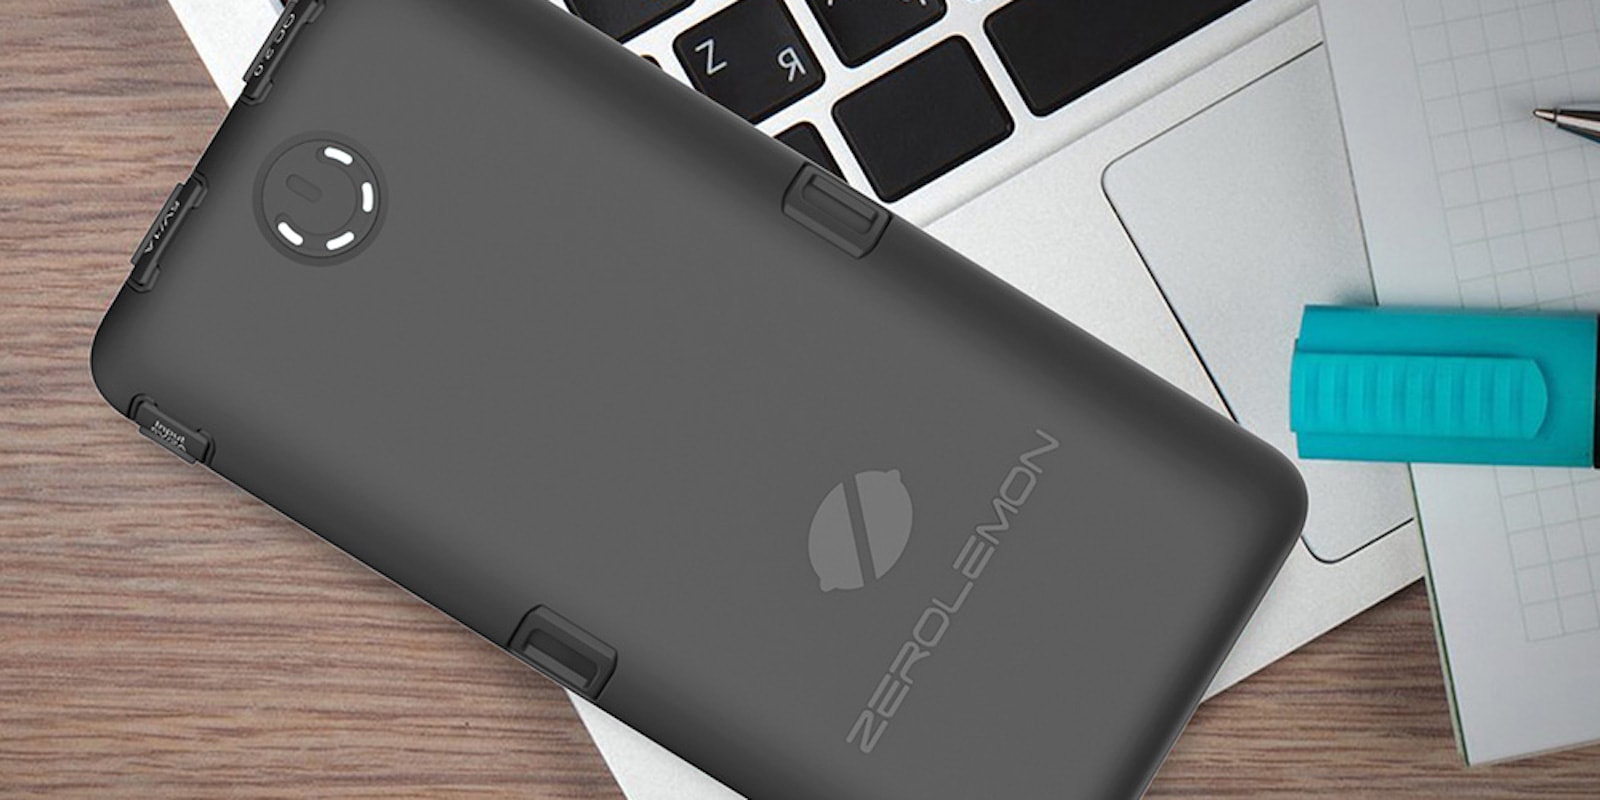 This one portable battery can juice up a smartphone 10 times, a tablet twice, and even a MacBook once.